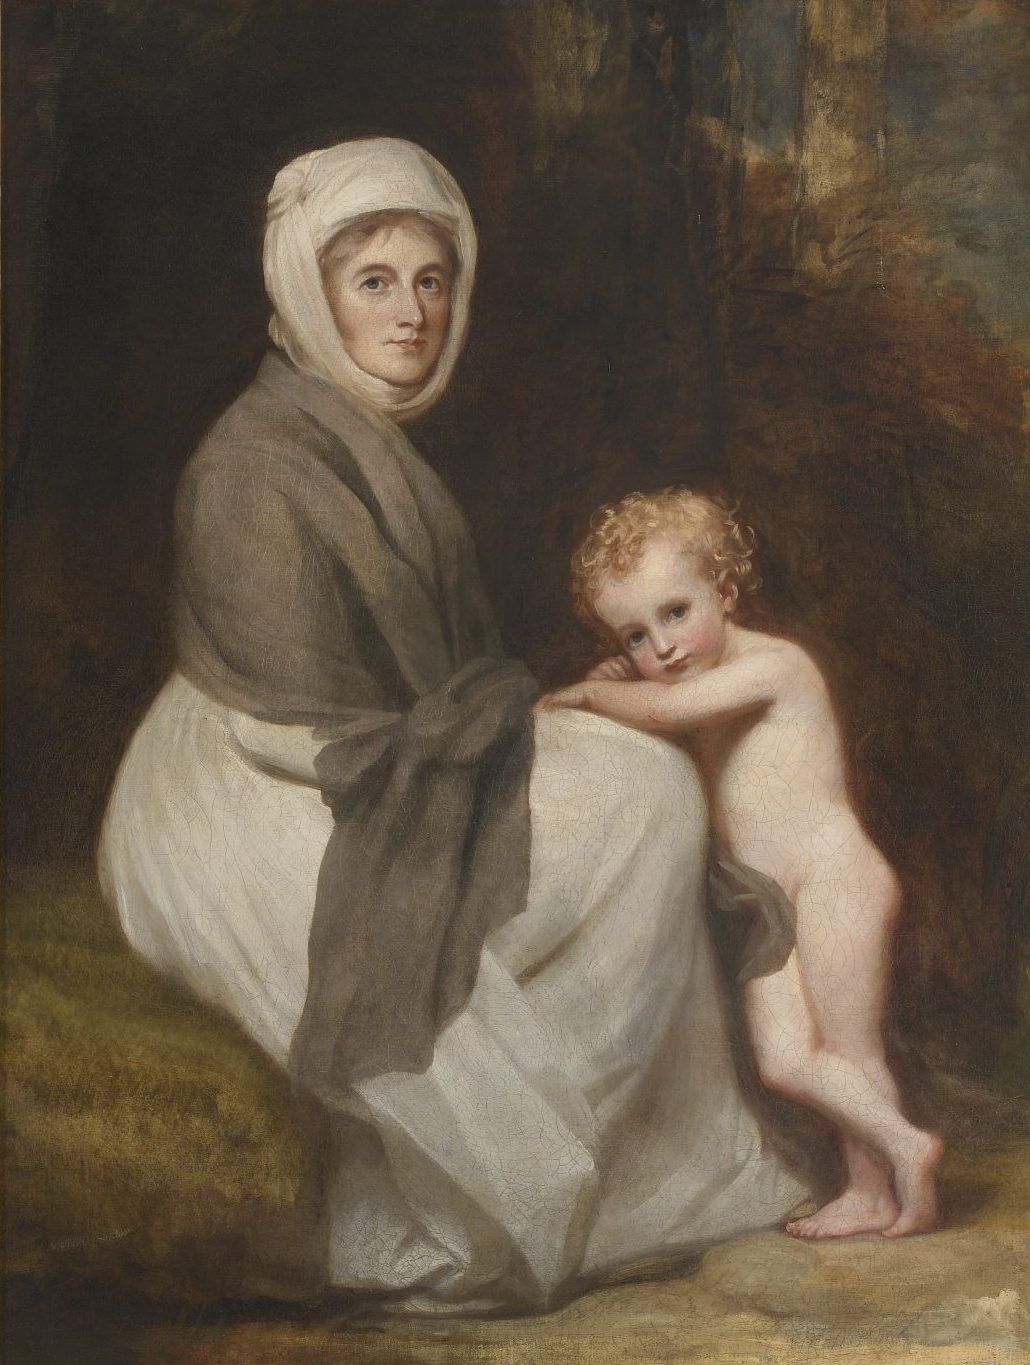 COLLECTION SPOTLIGHT: George Romney’s “Portrait of Mrs. St. George and Child”